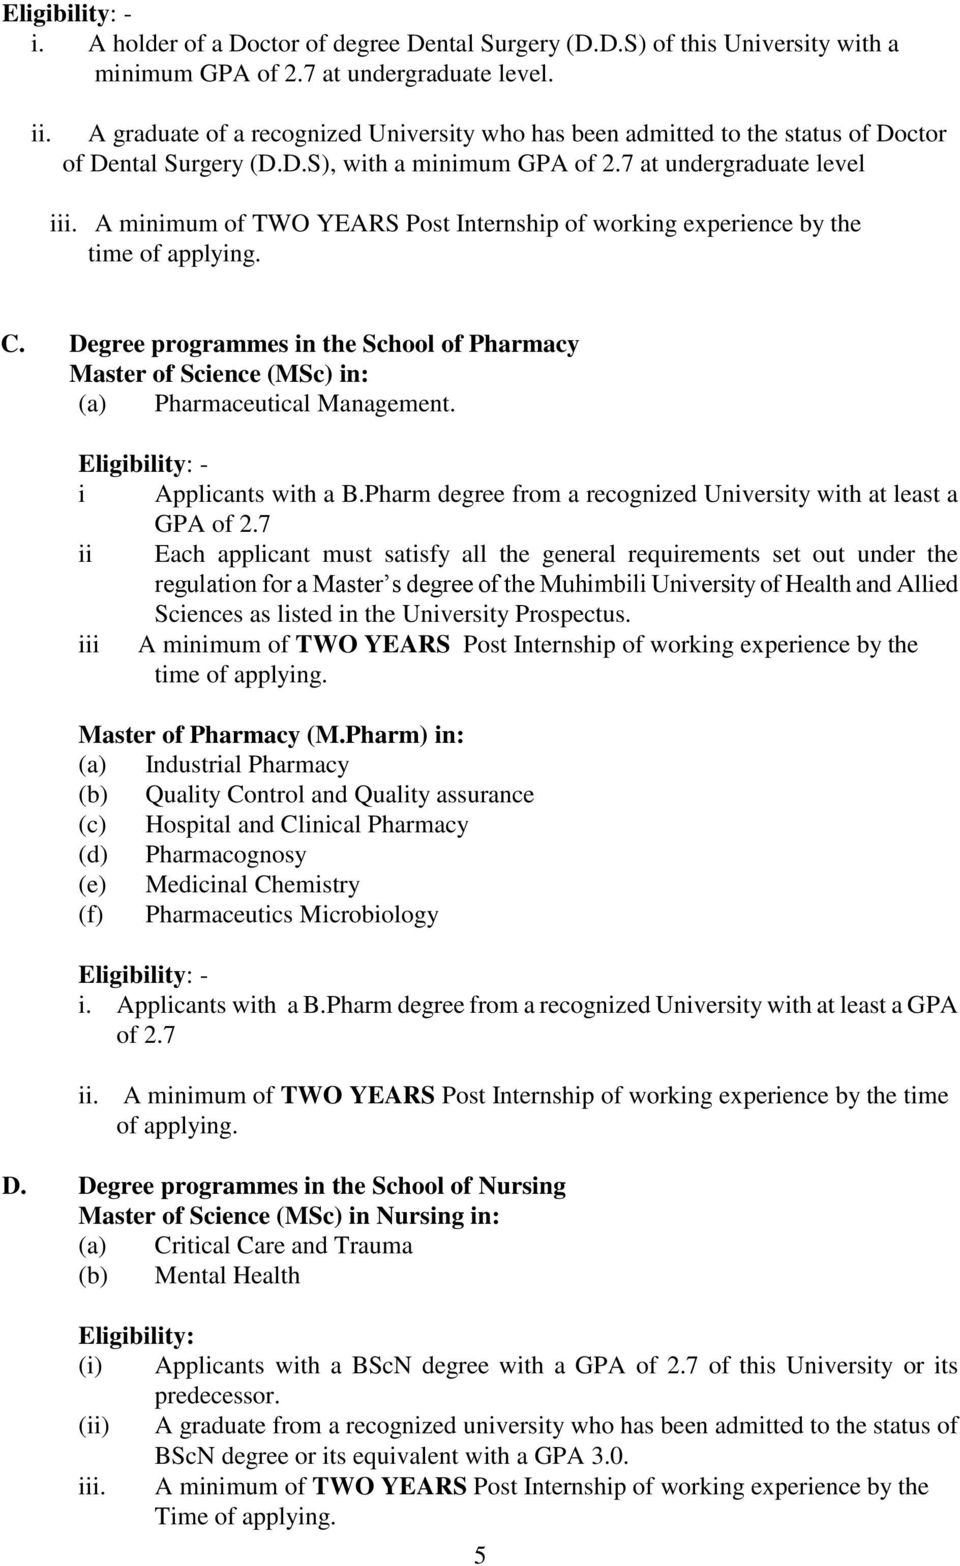 A minimum of TWO YEARS Post Internship of working experience by the time of applying. C. Degree programmes in the School of Pharmacy Master of Science (MSc) in: (a) Pharmaceutical Management.